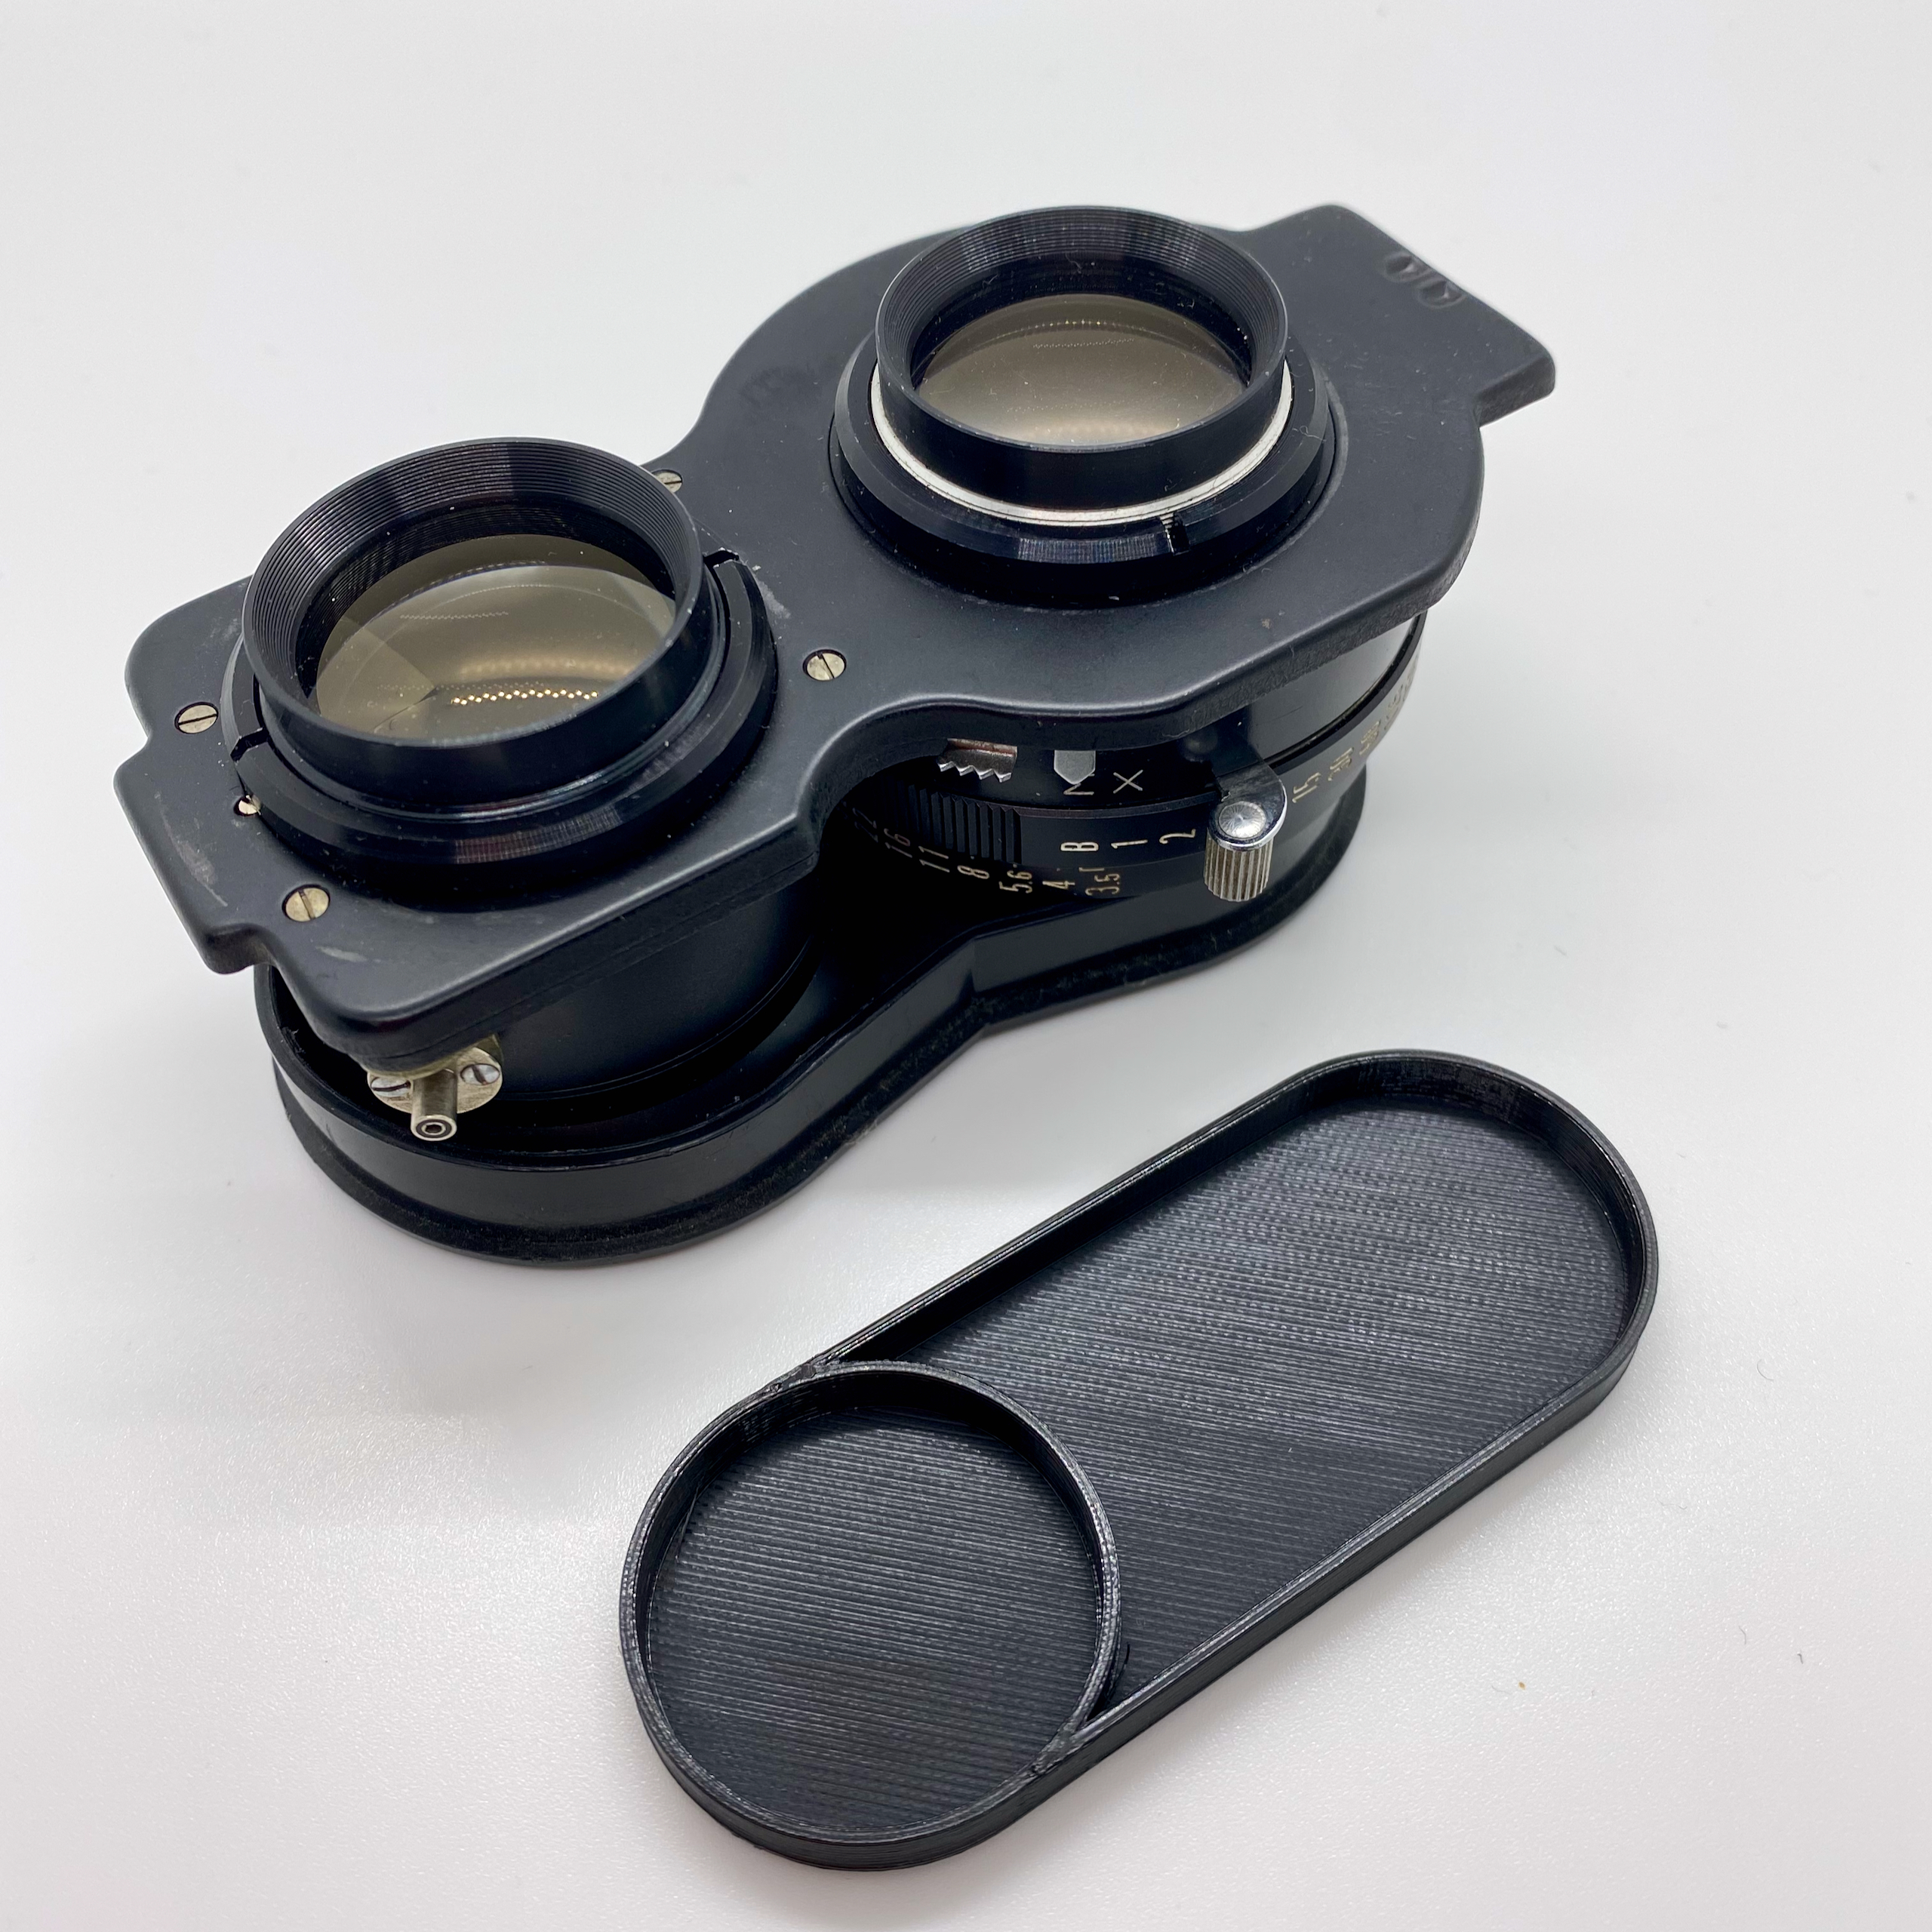 Mamiya Sekor Rear Lens Cover for 80mm f/2.8 and 105mm f/3.5 TLR lenses